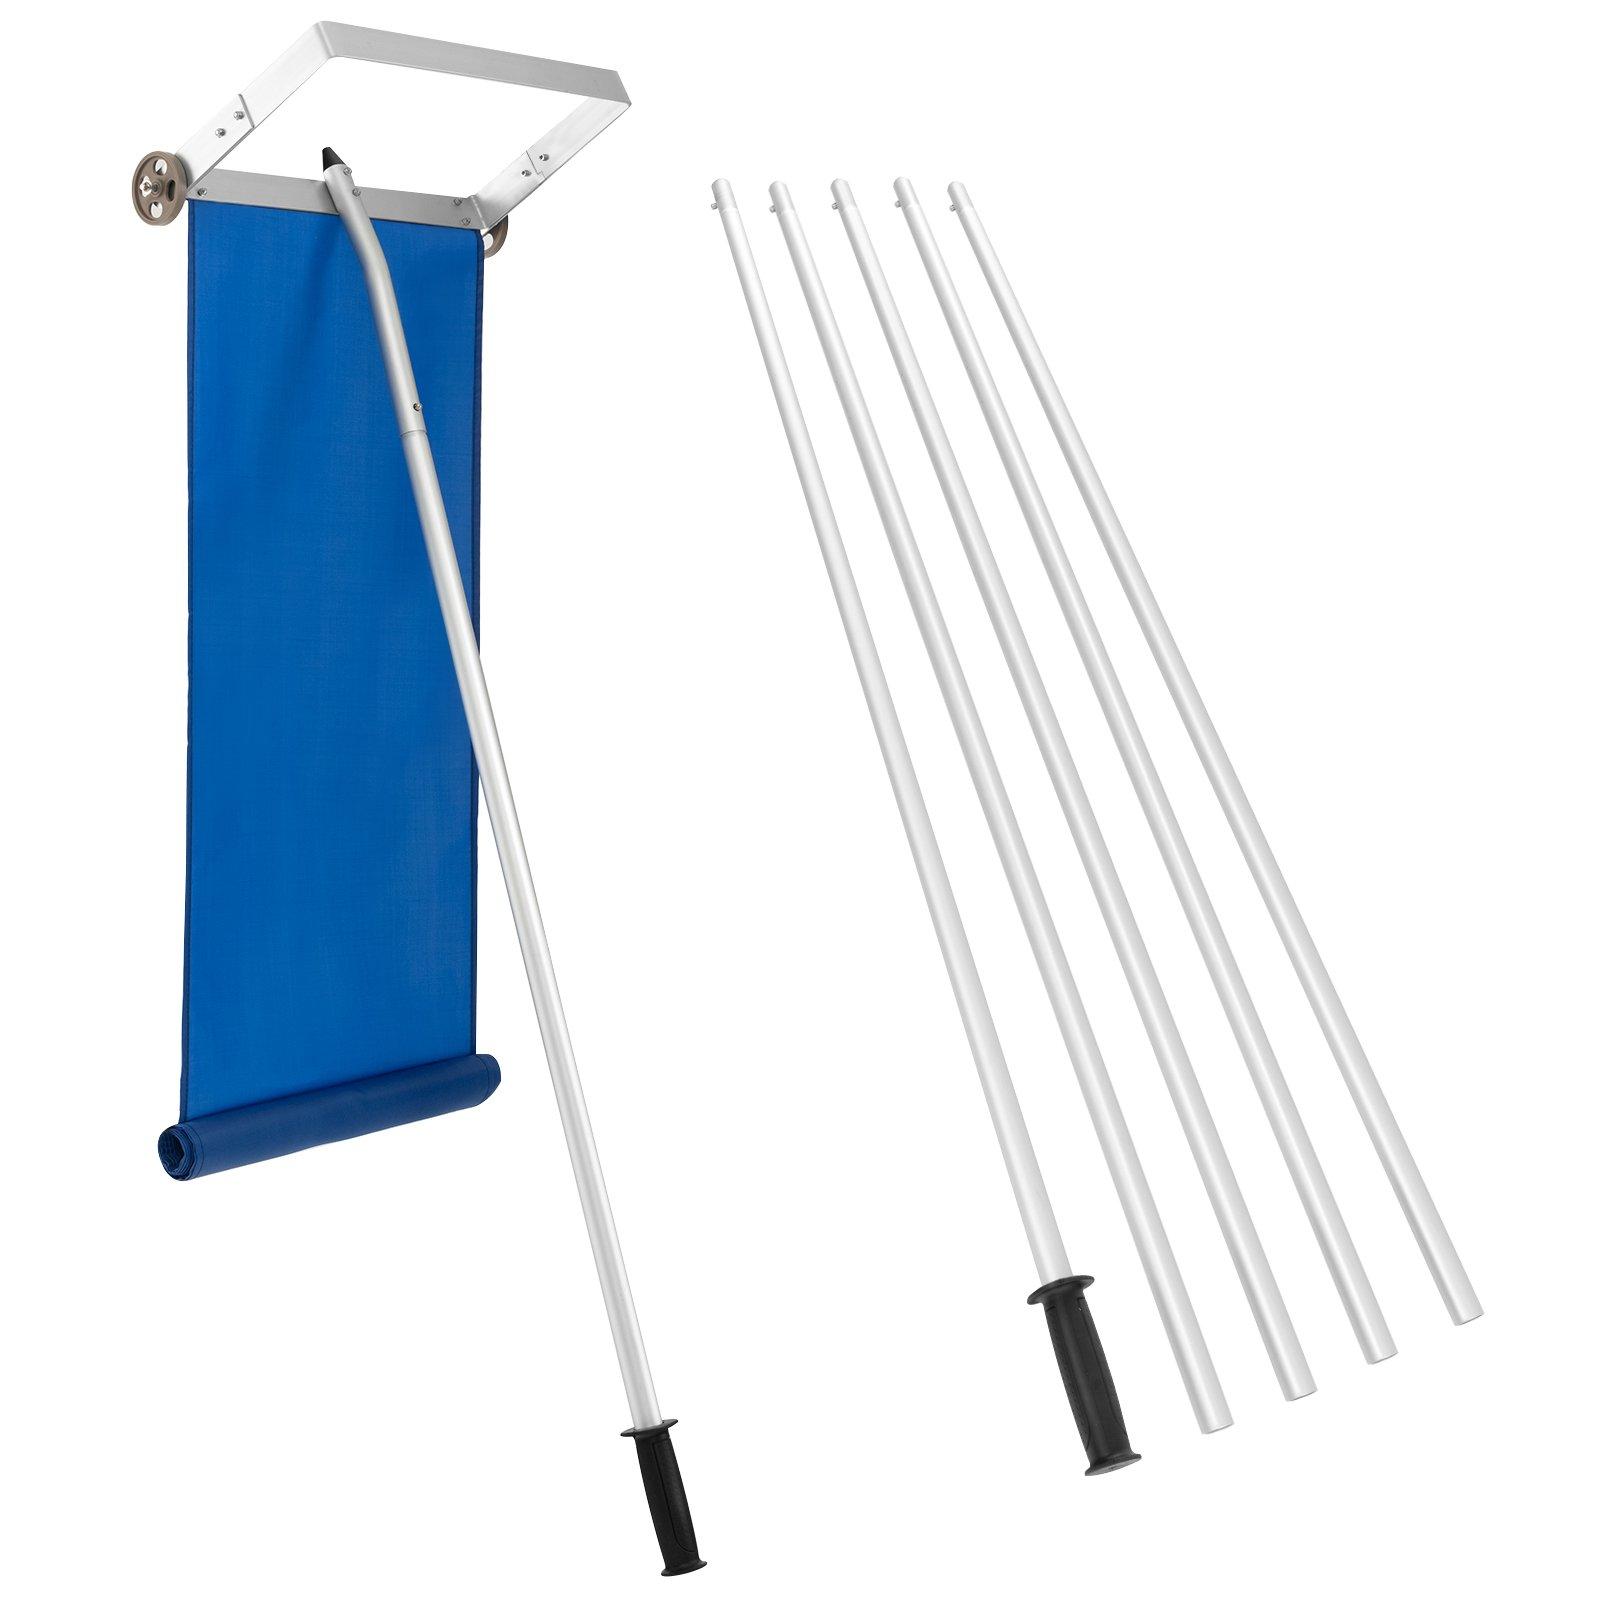 148cm-610cm Snow Roof Rake Aluminium Snow Removal w/ 5 Section Pole for House & Vehicle